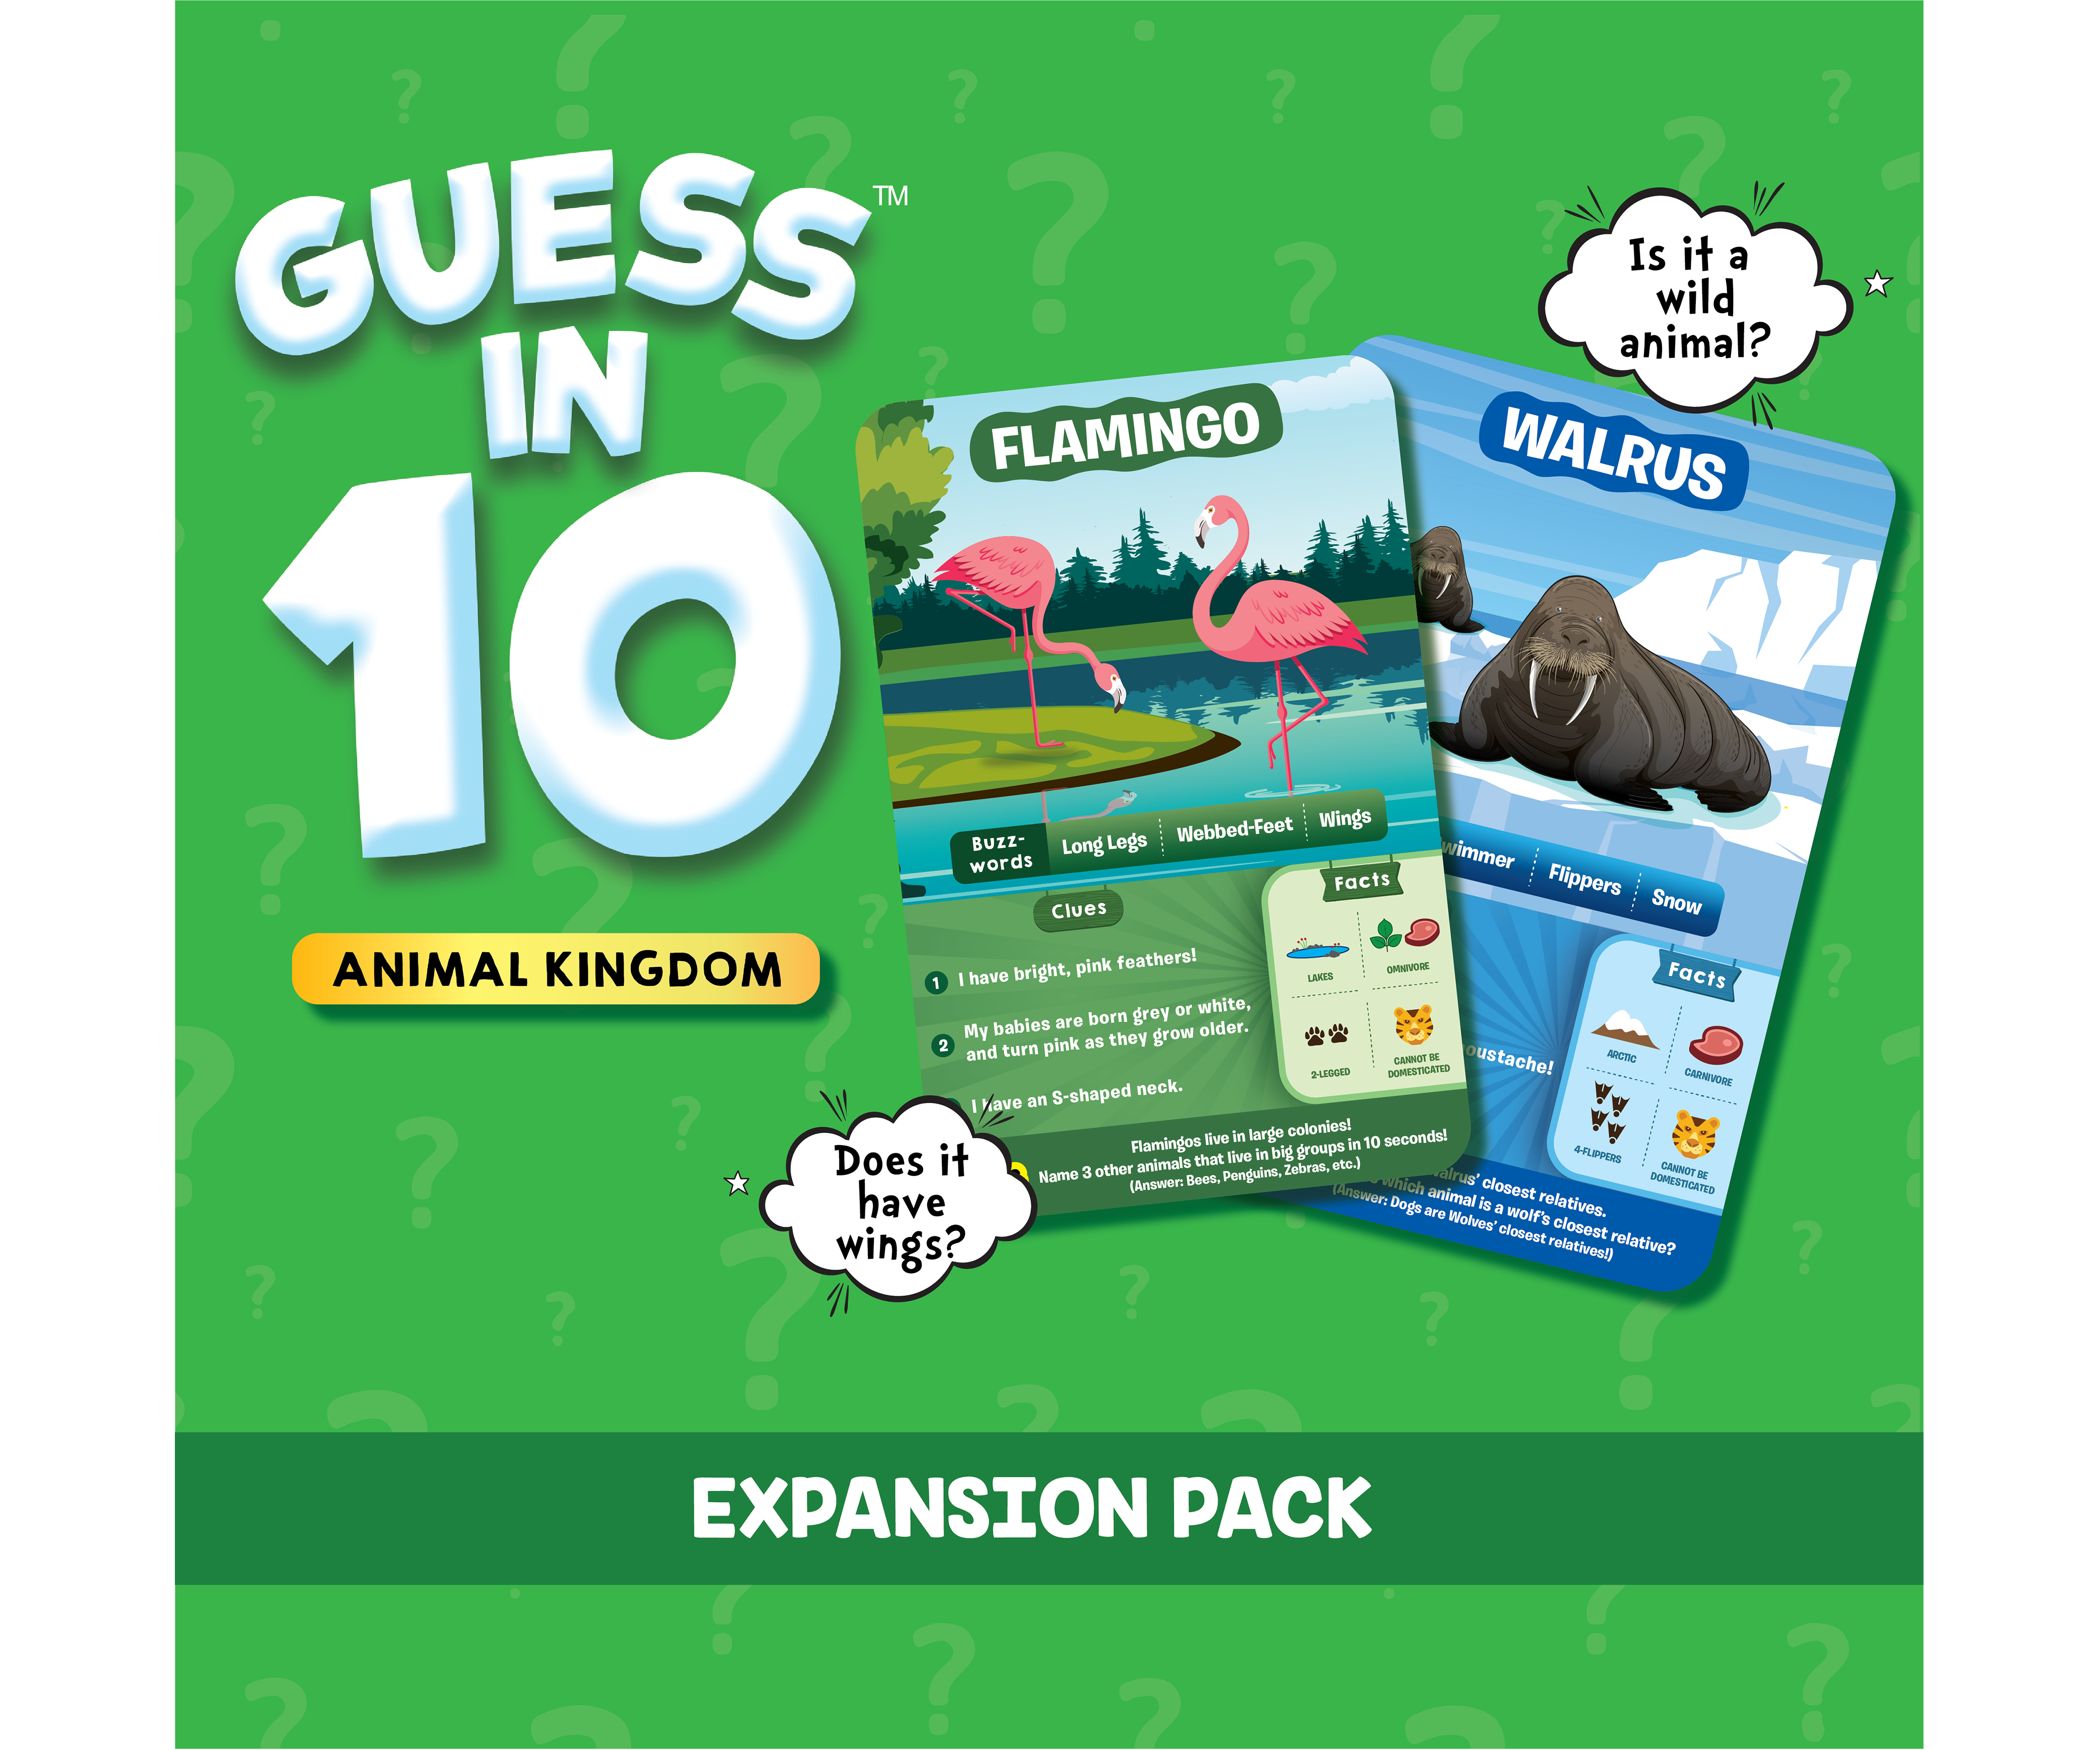 Guess in 10 Animal Kingdom - Downloadable Expansion Pack